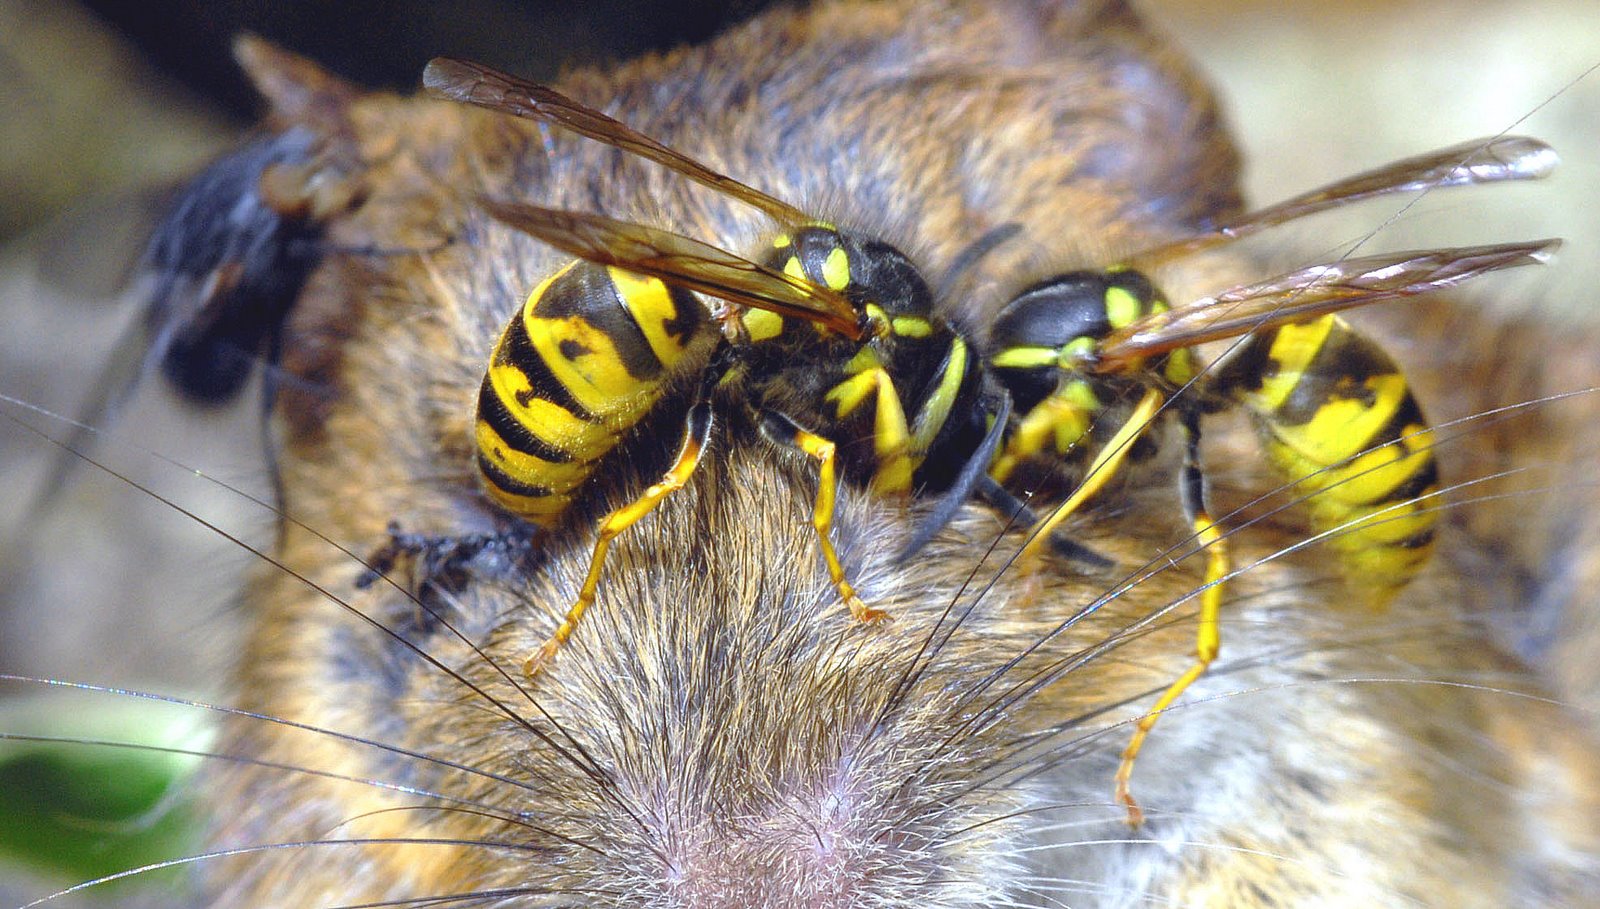 [Wasps+getting+protein+dead+mouse.jpg]